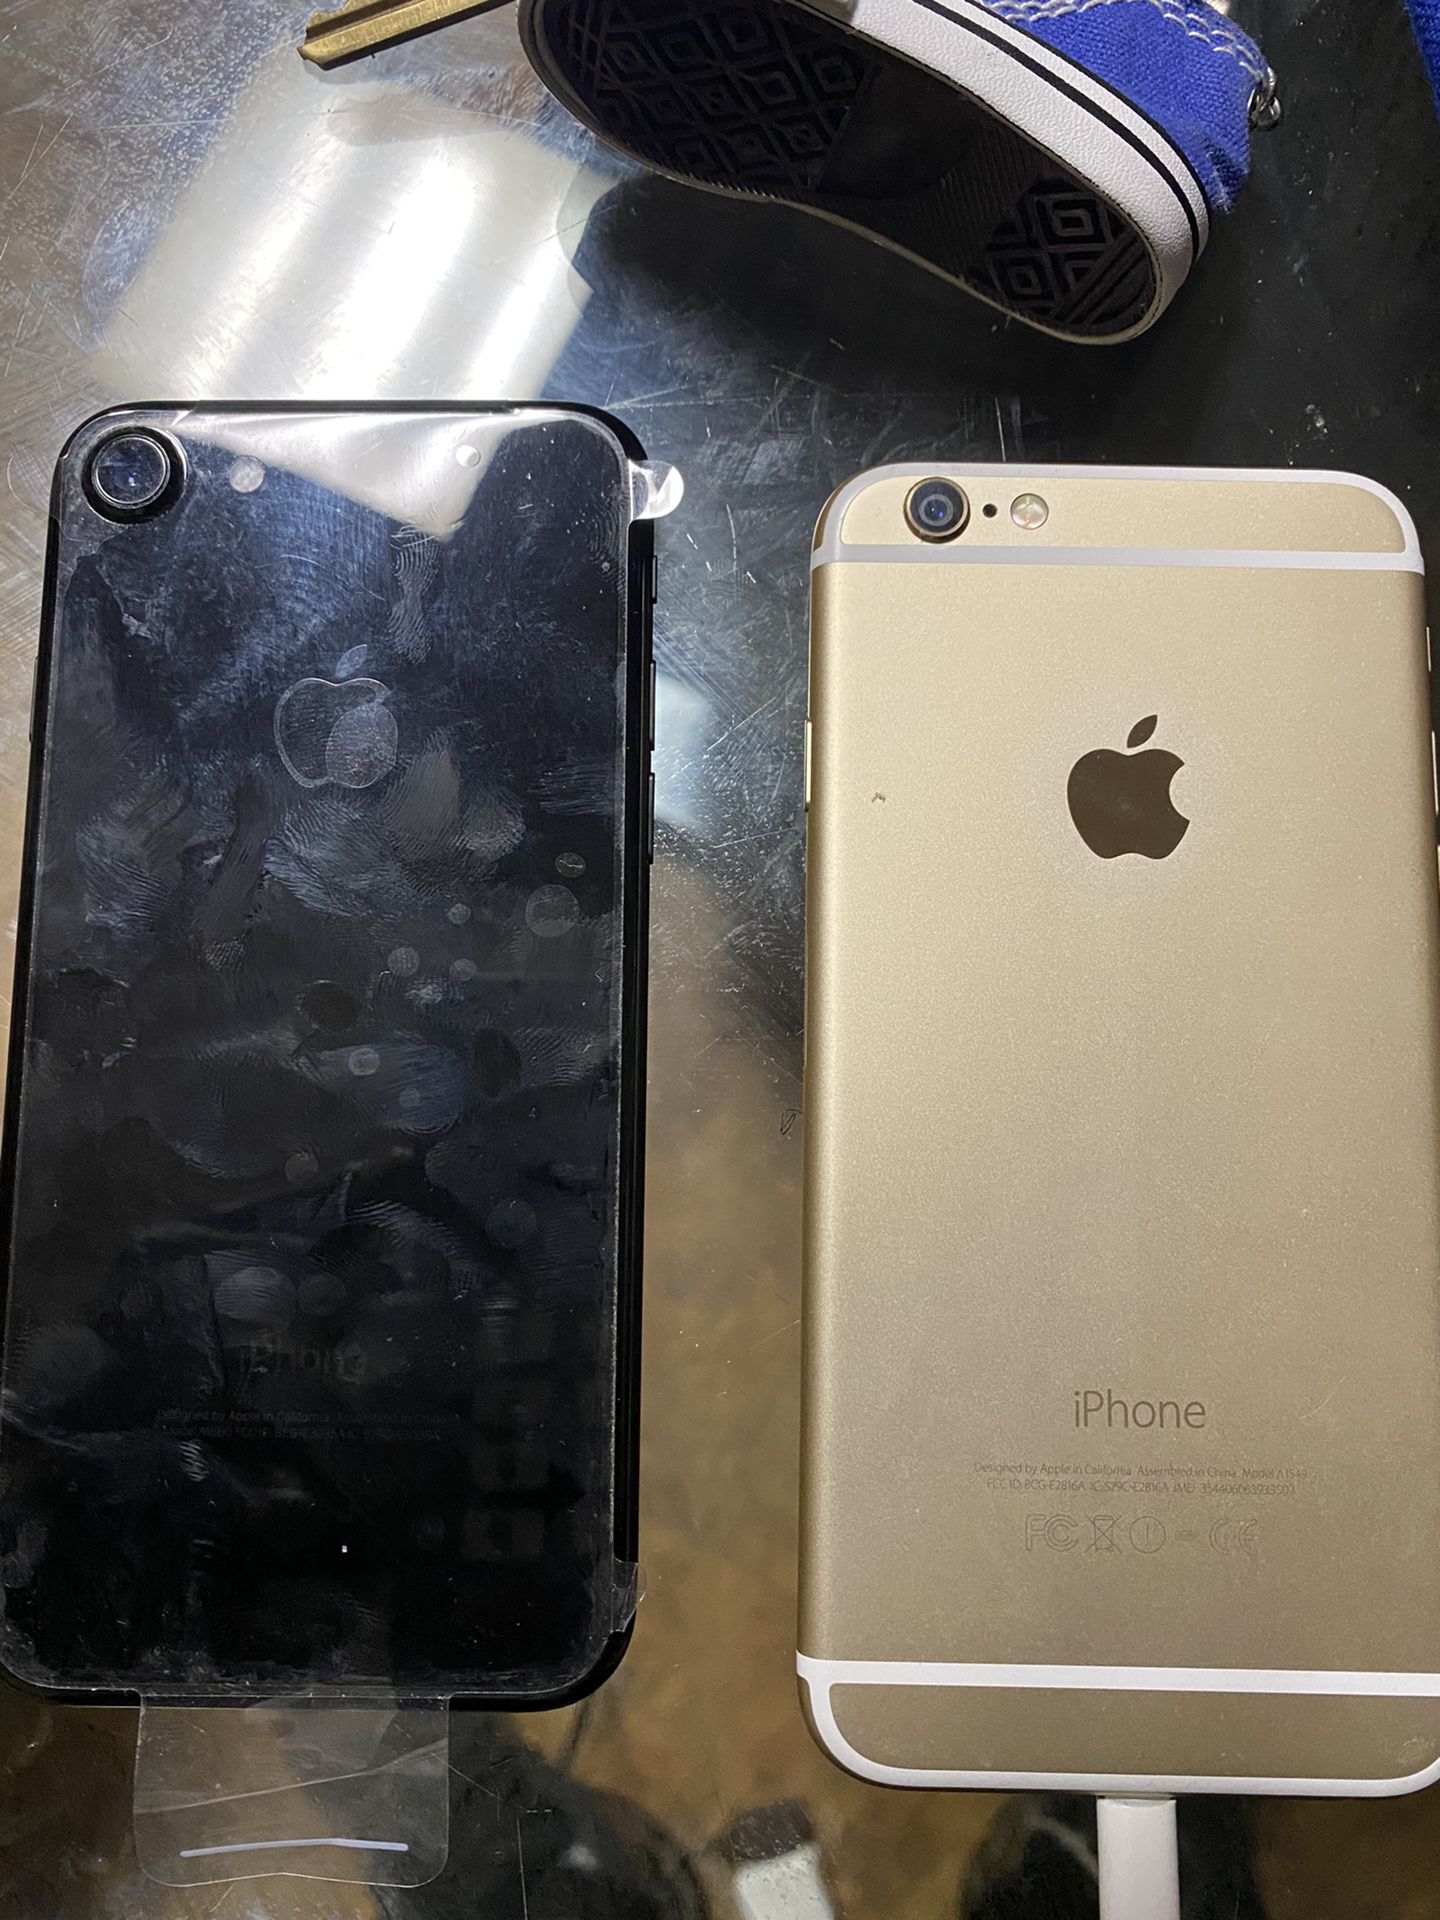 Unlocked IPhone 7 and IPhone 6s for Sale No Carrier New! $350 for both